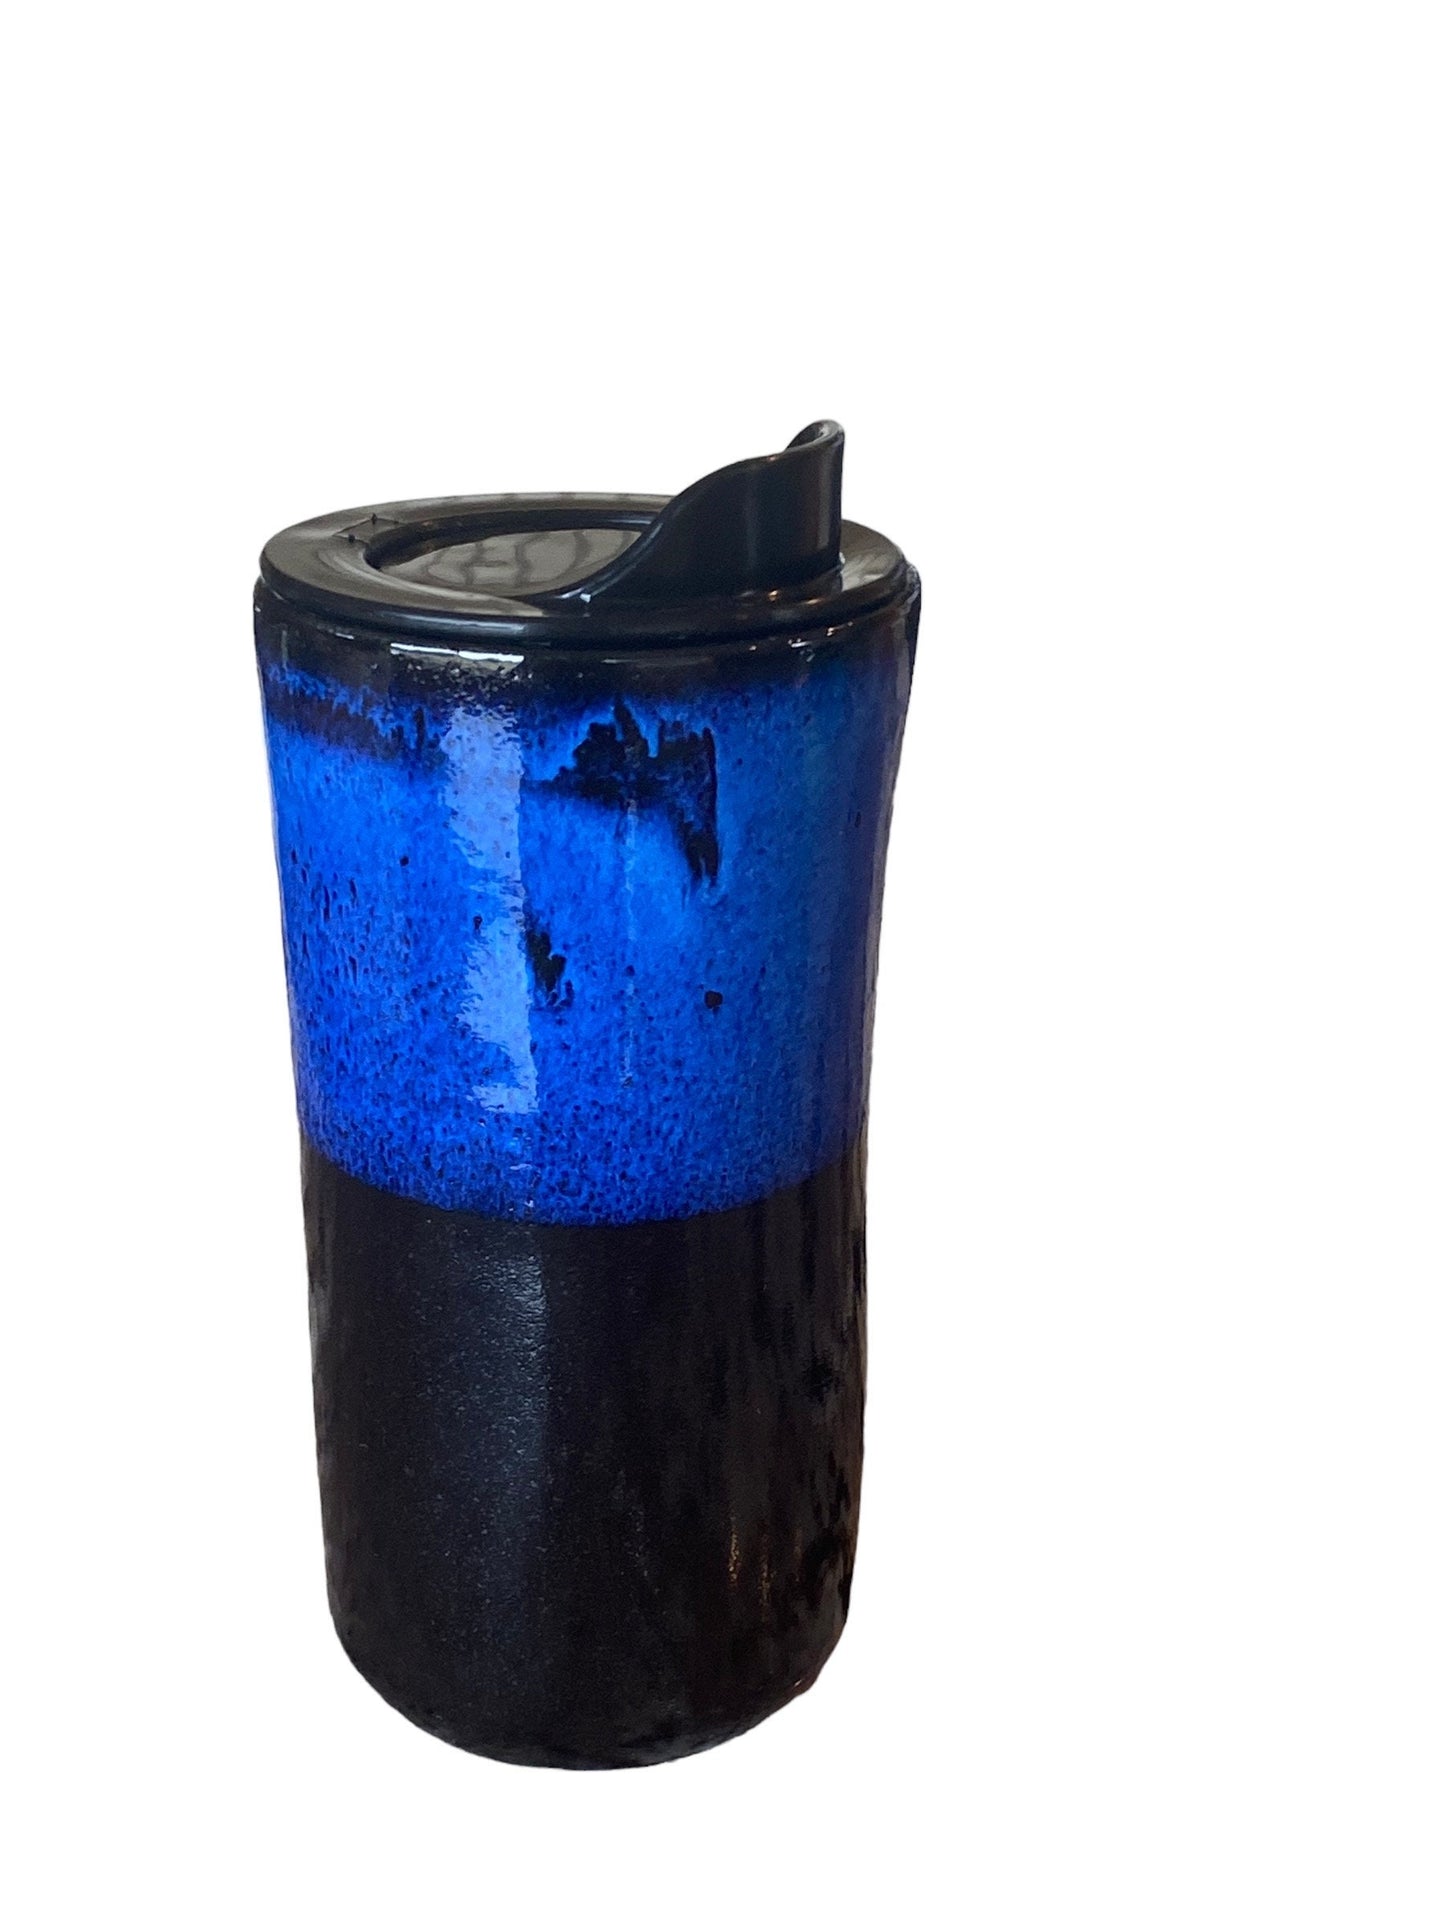 Handmade 16-Ounce Travel Mug In Gloss Black and Electric Blue Glaze With Locking Lid